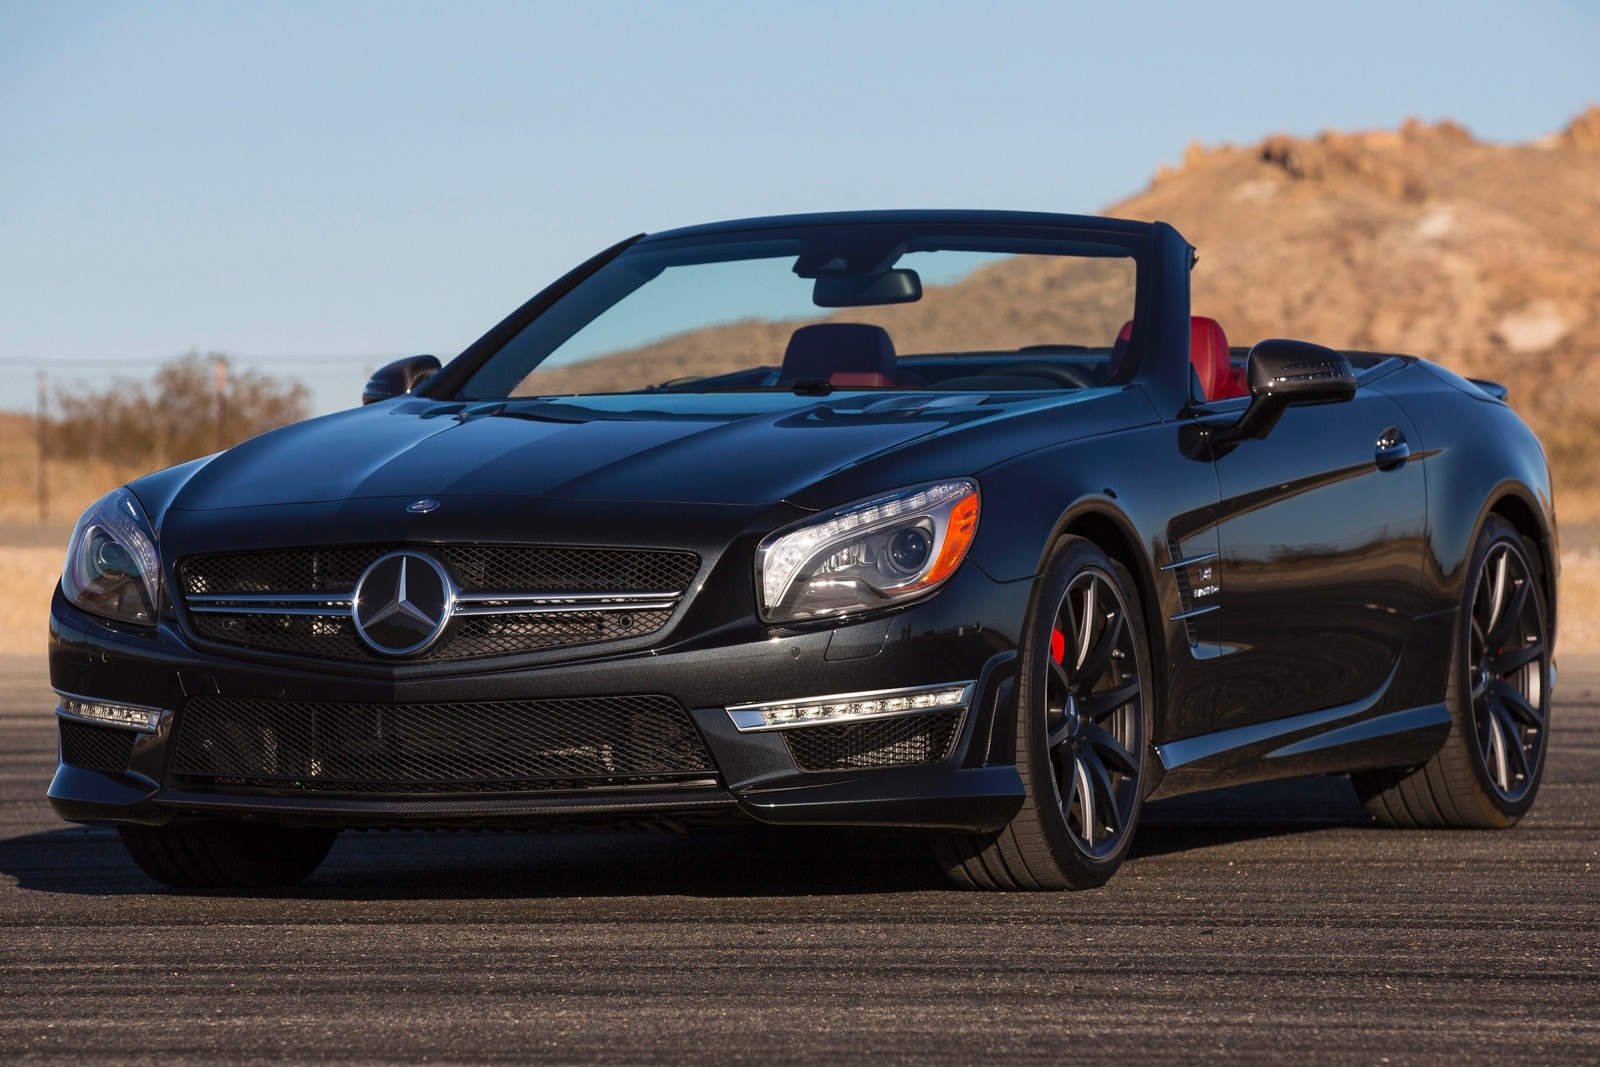 Used 2014 Mercedes-Benz SL-Class SL63 AMG Review | Edmunds